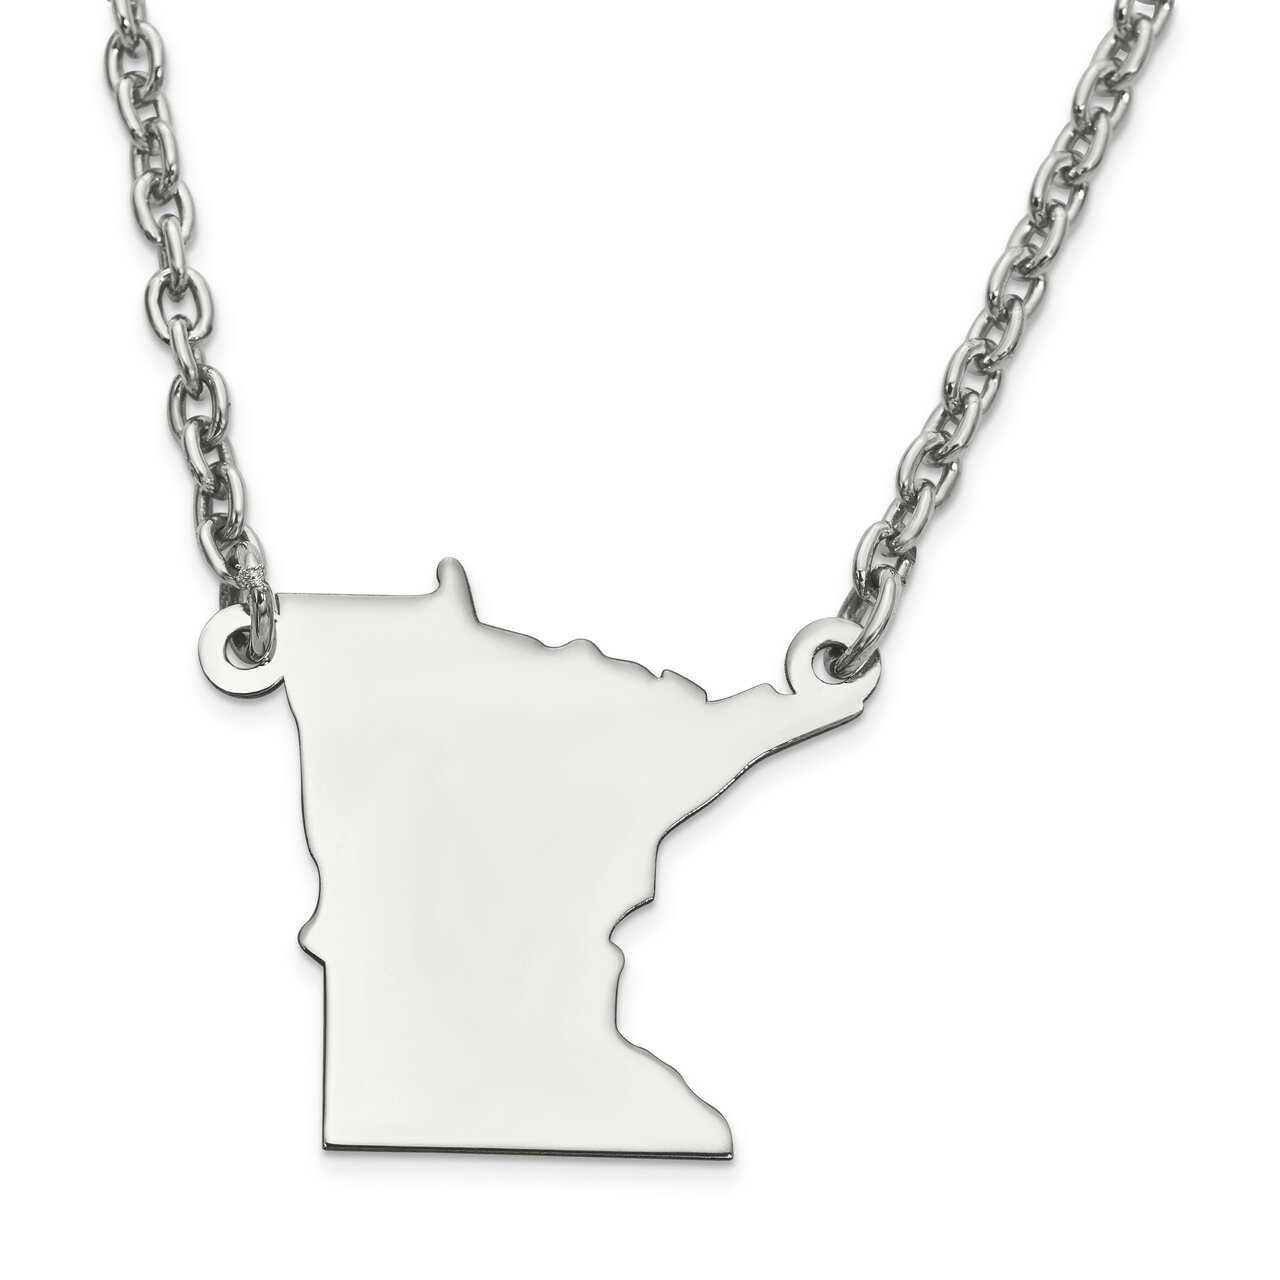 Minnesota State Pendant Necklace with Chain 14k White Gold Engravable XNA706W-MN